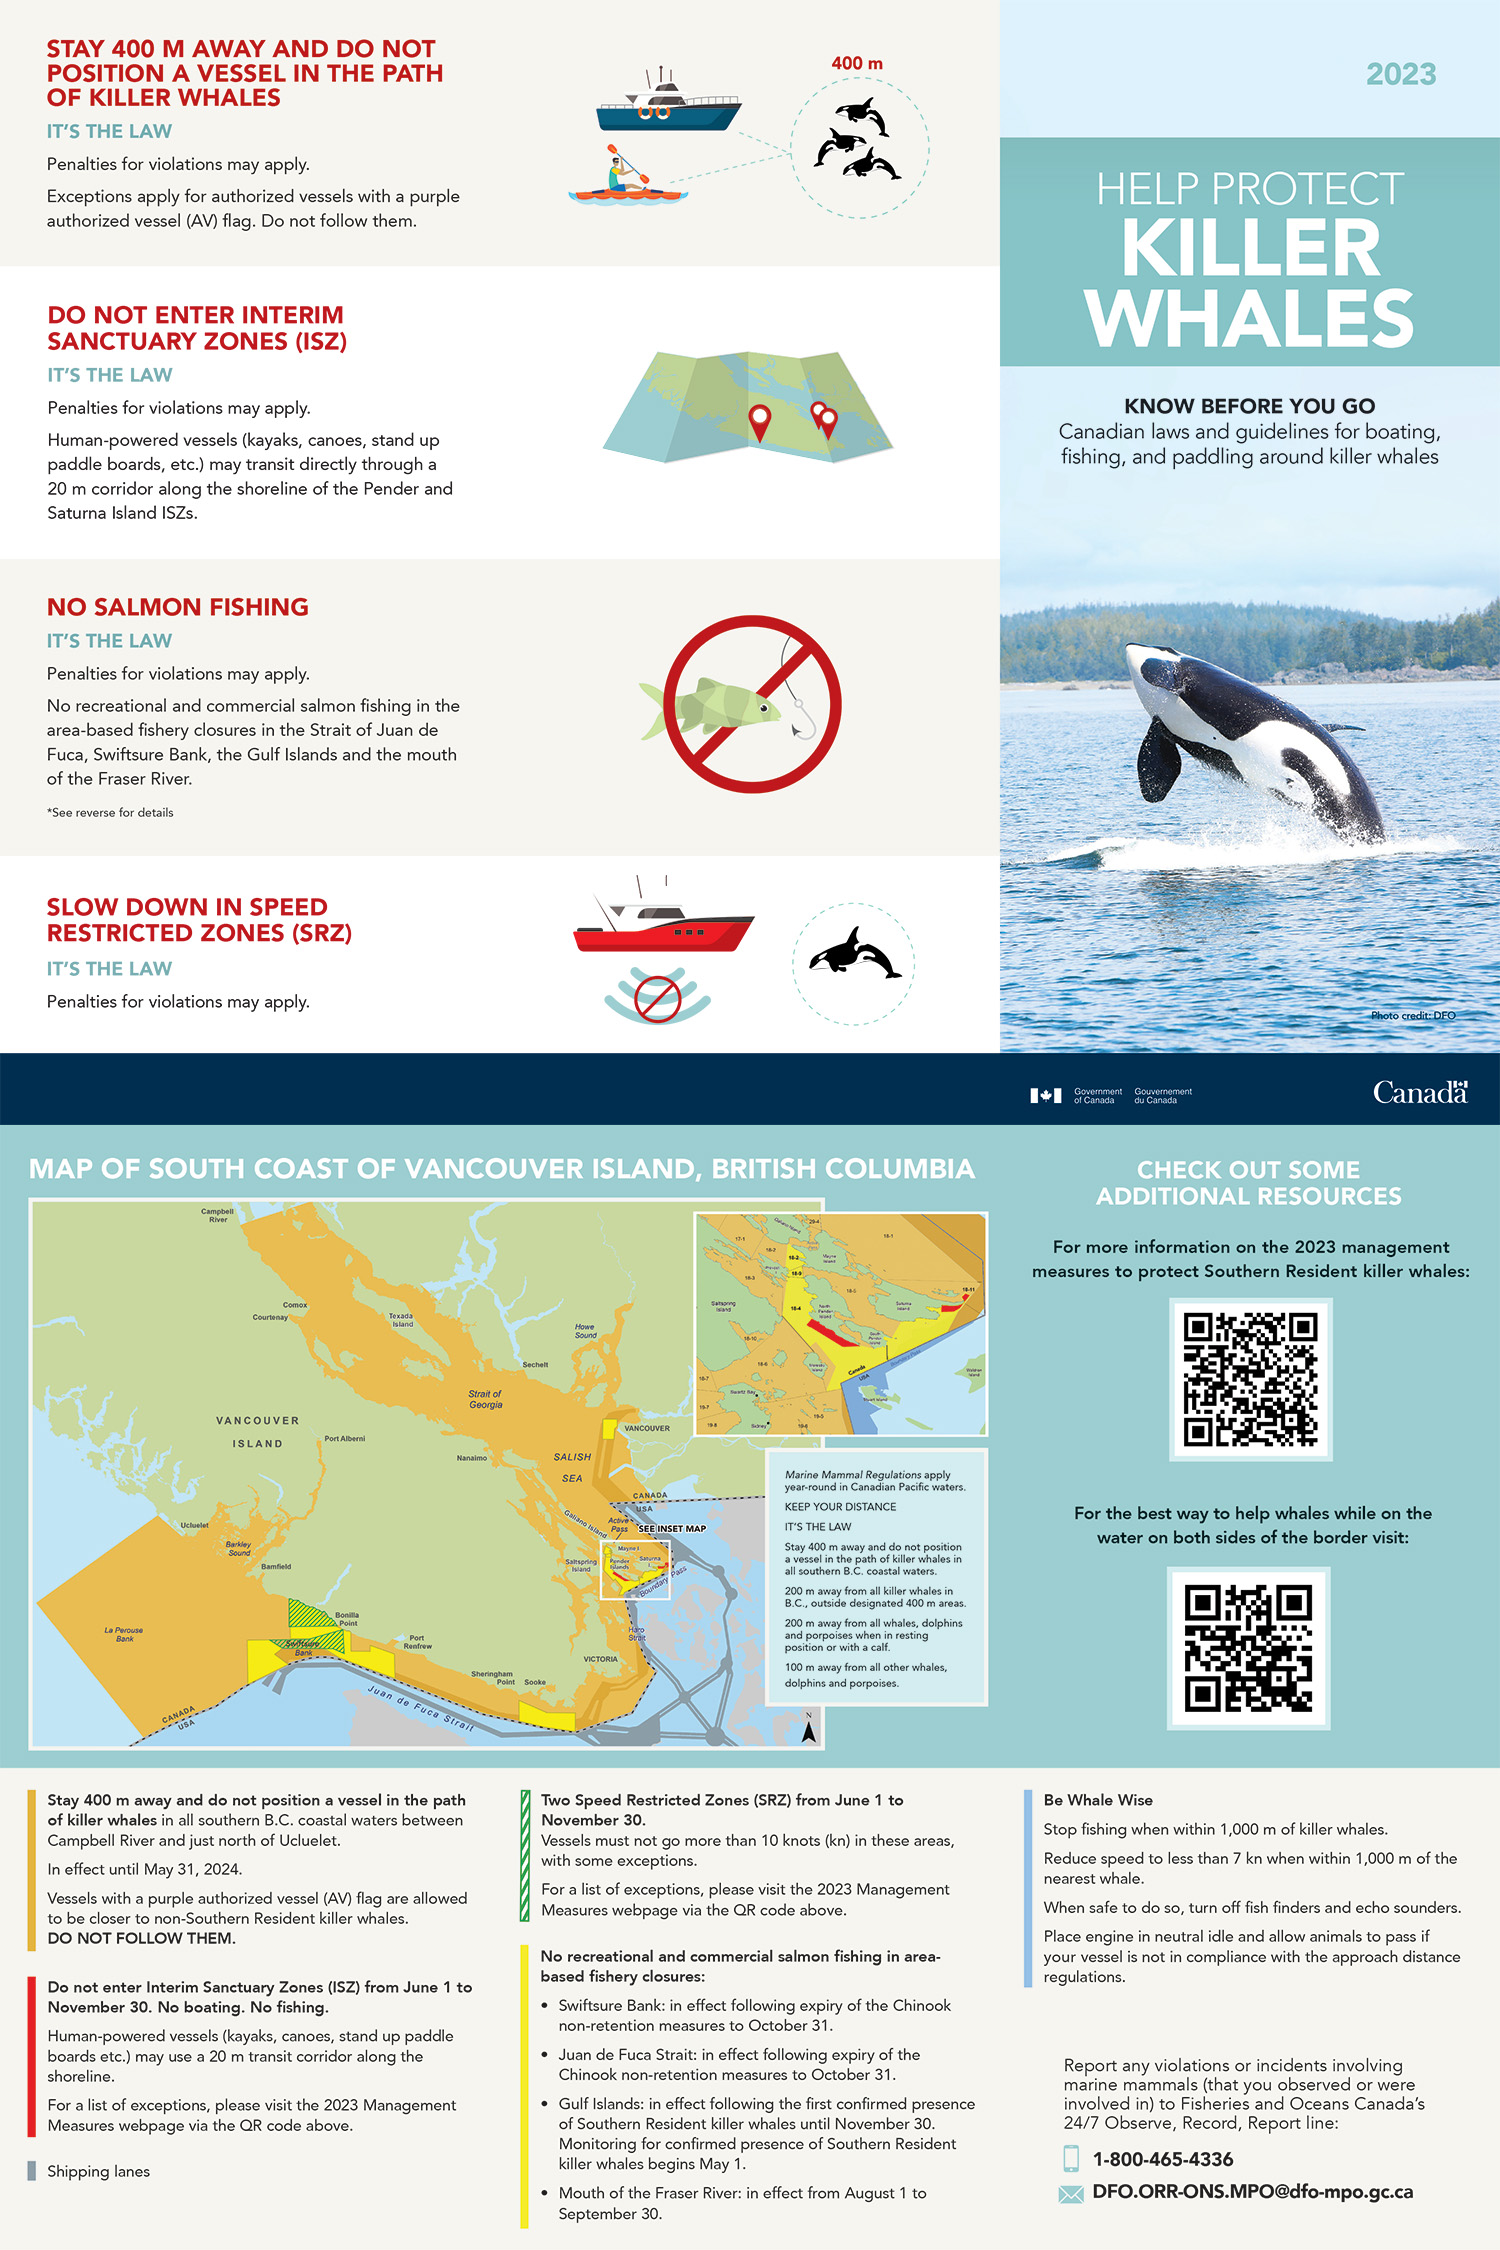 Infographic: Help protect killer whales